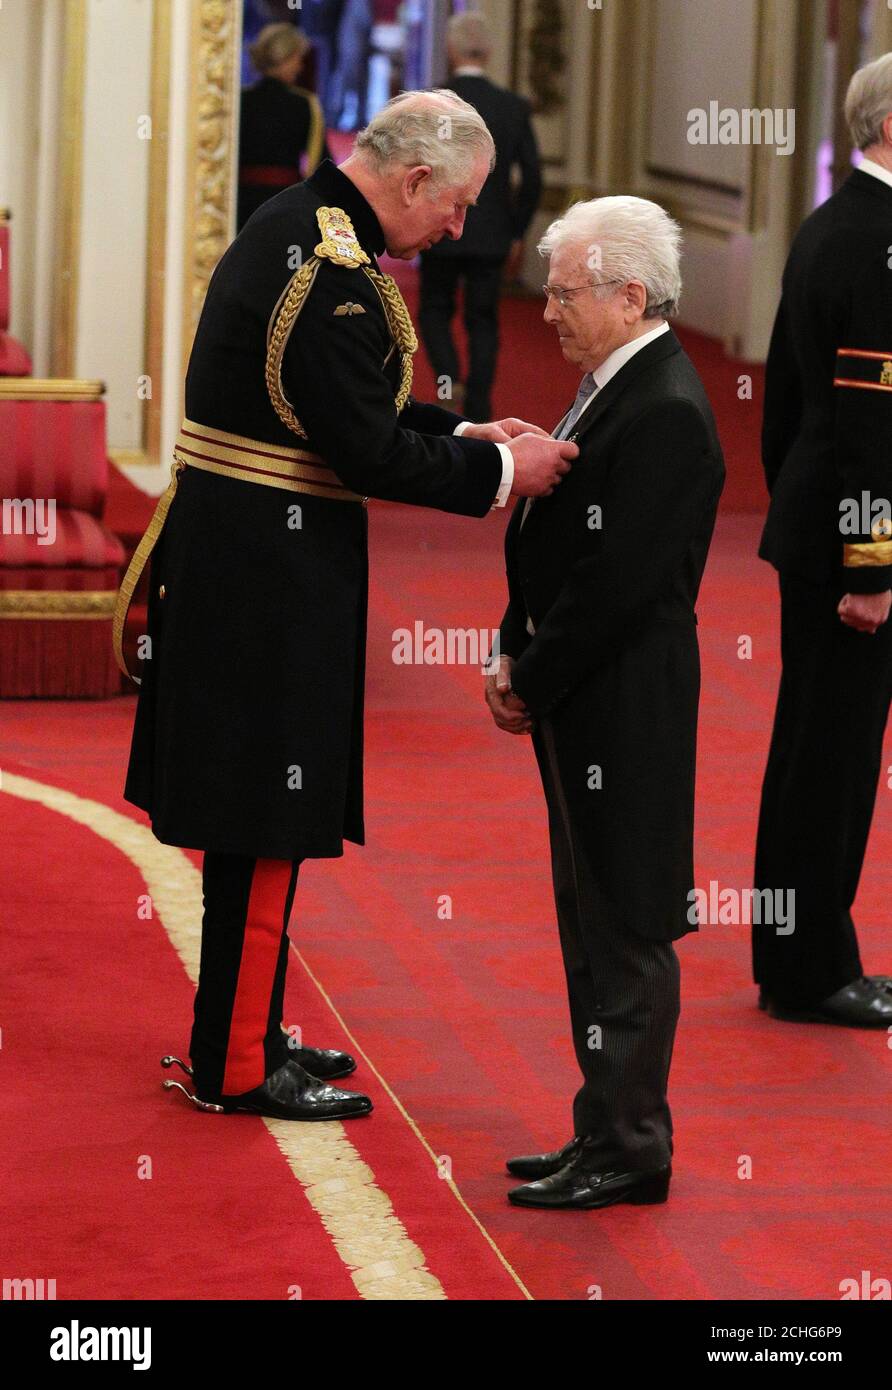 Michael Prendergast from Wrexham, known professionally as Mike Pender, is made an MBE (Member of the Order of the British Empire) by the Prince of Wales during an investiture ceremony at Buckingham Palace, London. Stock Photo